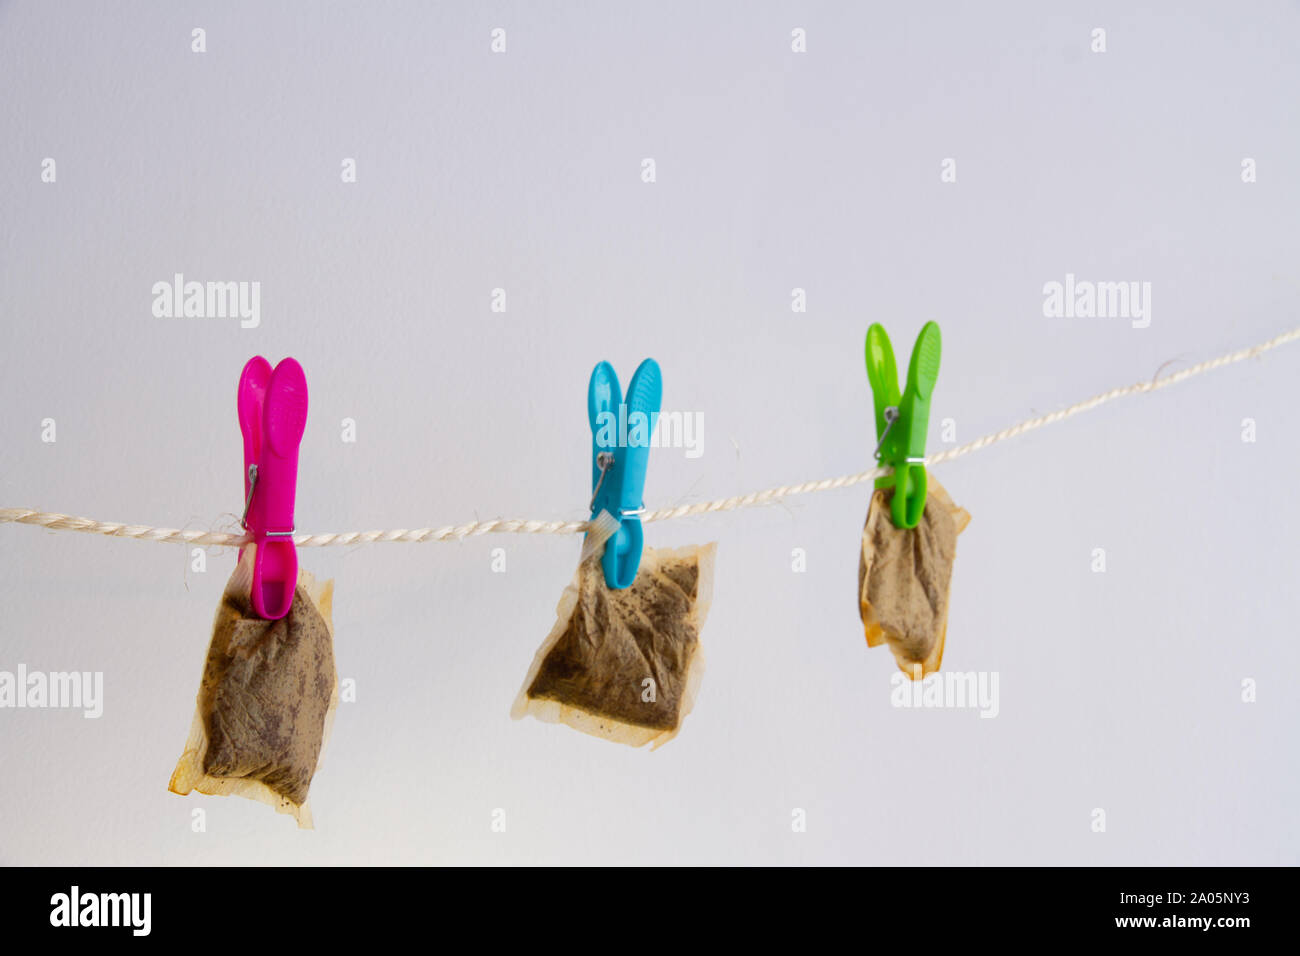 Three used teabags hang to dry on a washing line with colourful pegs, against a neutral background, representing frugality Stock Photo